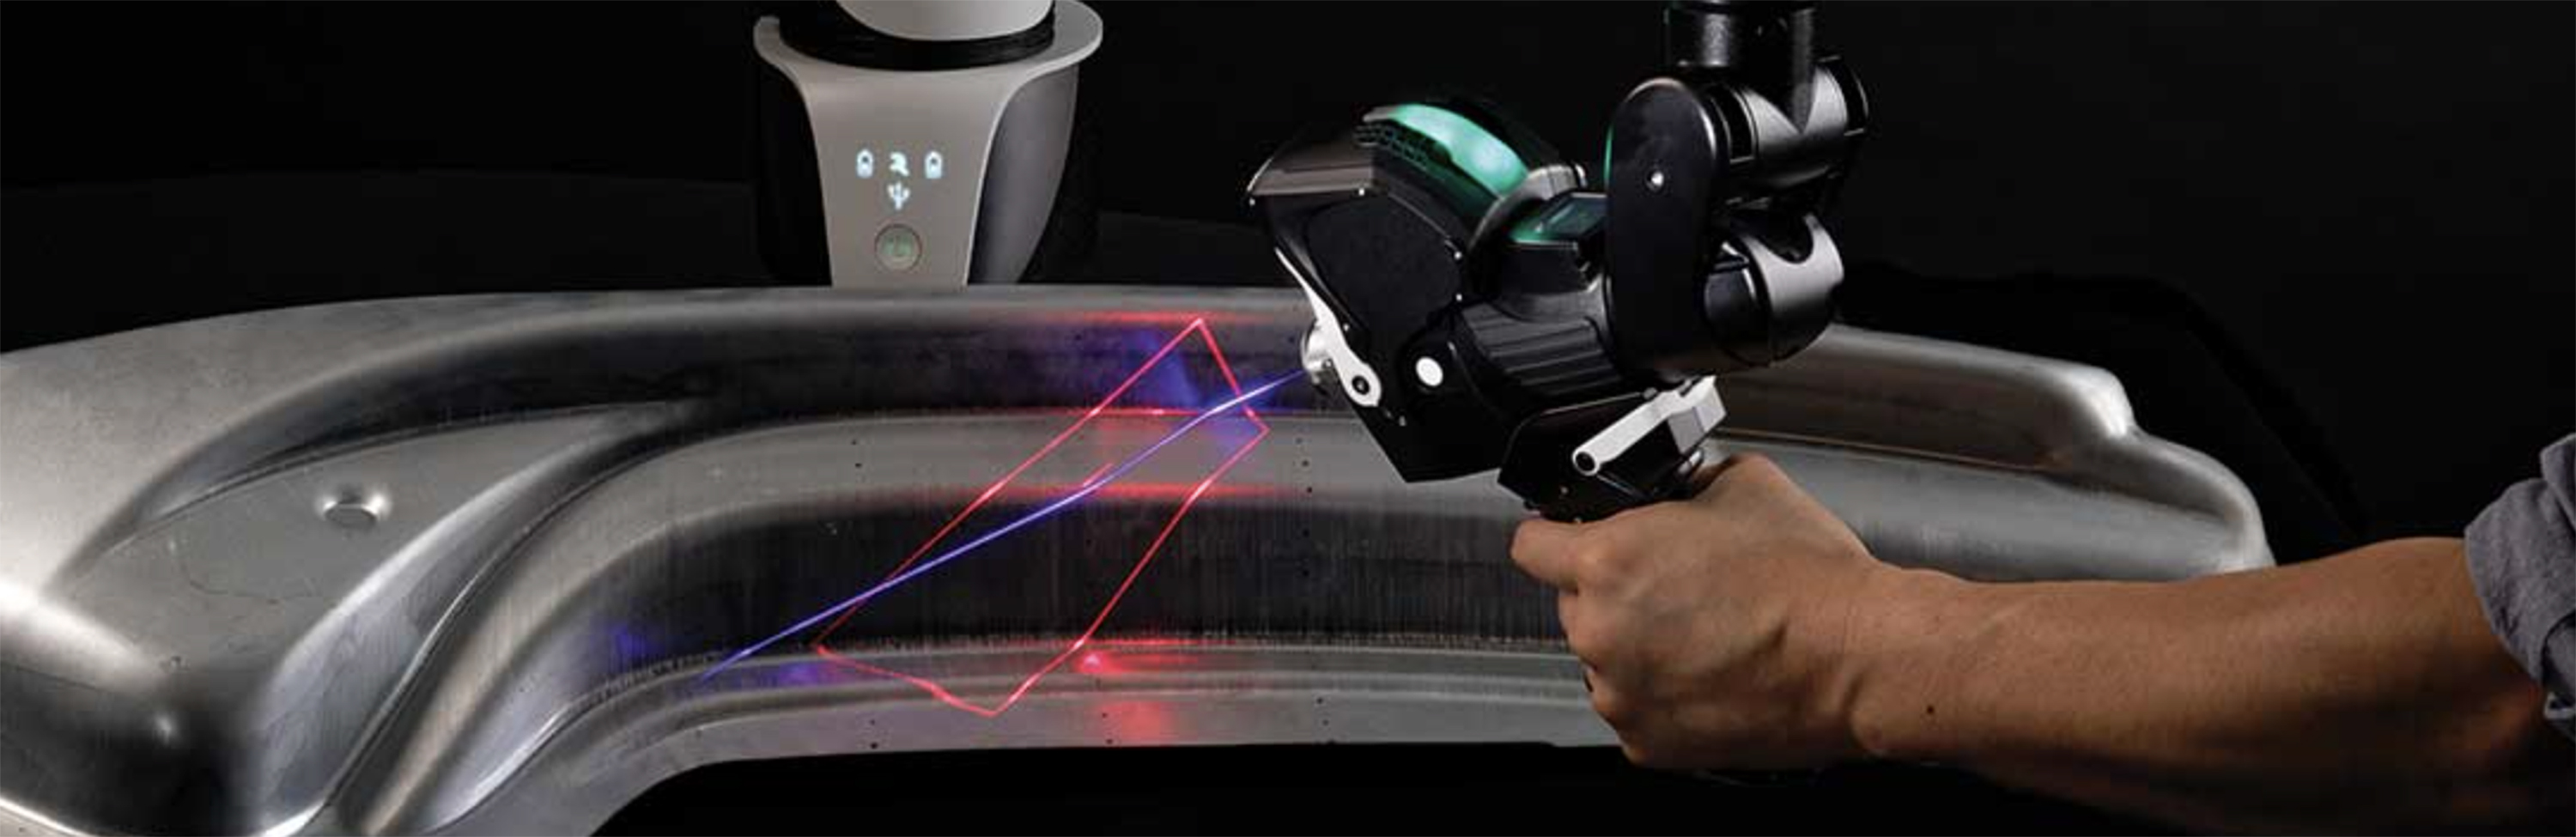 The Hexagon RS6 laser scanner can scan up to 1.2 million points/second with a scan rate of 300 Hz.